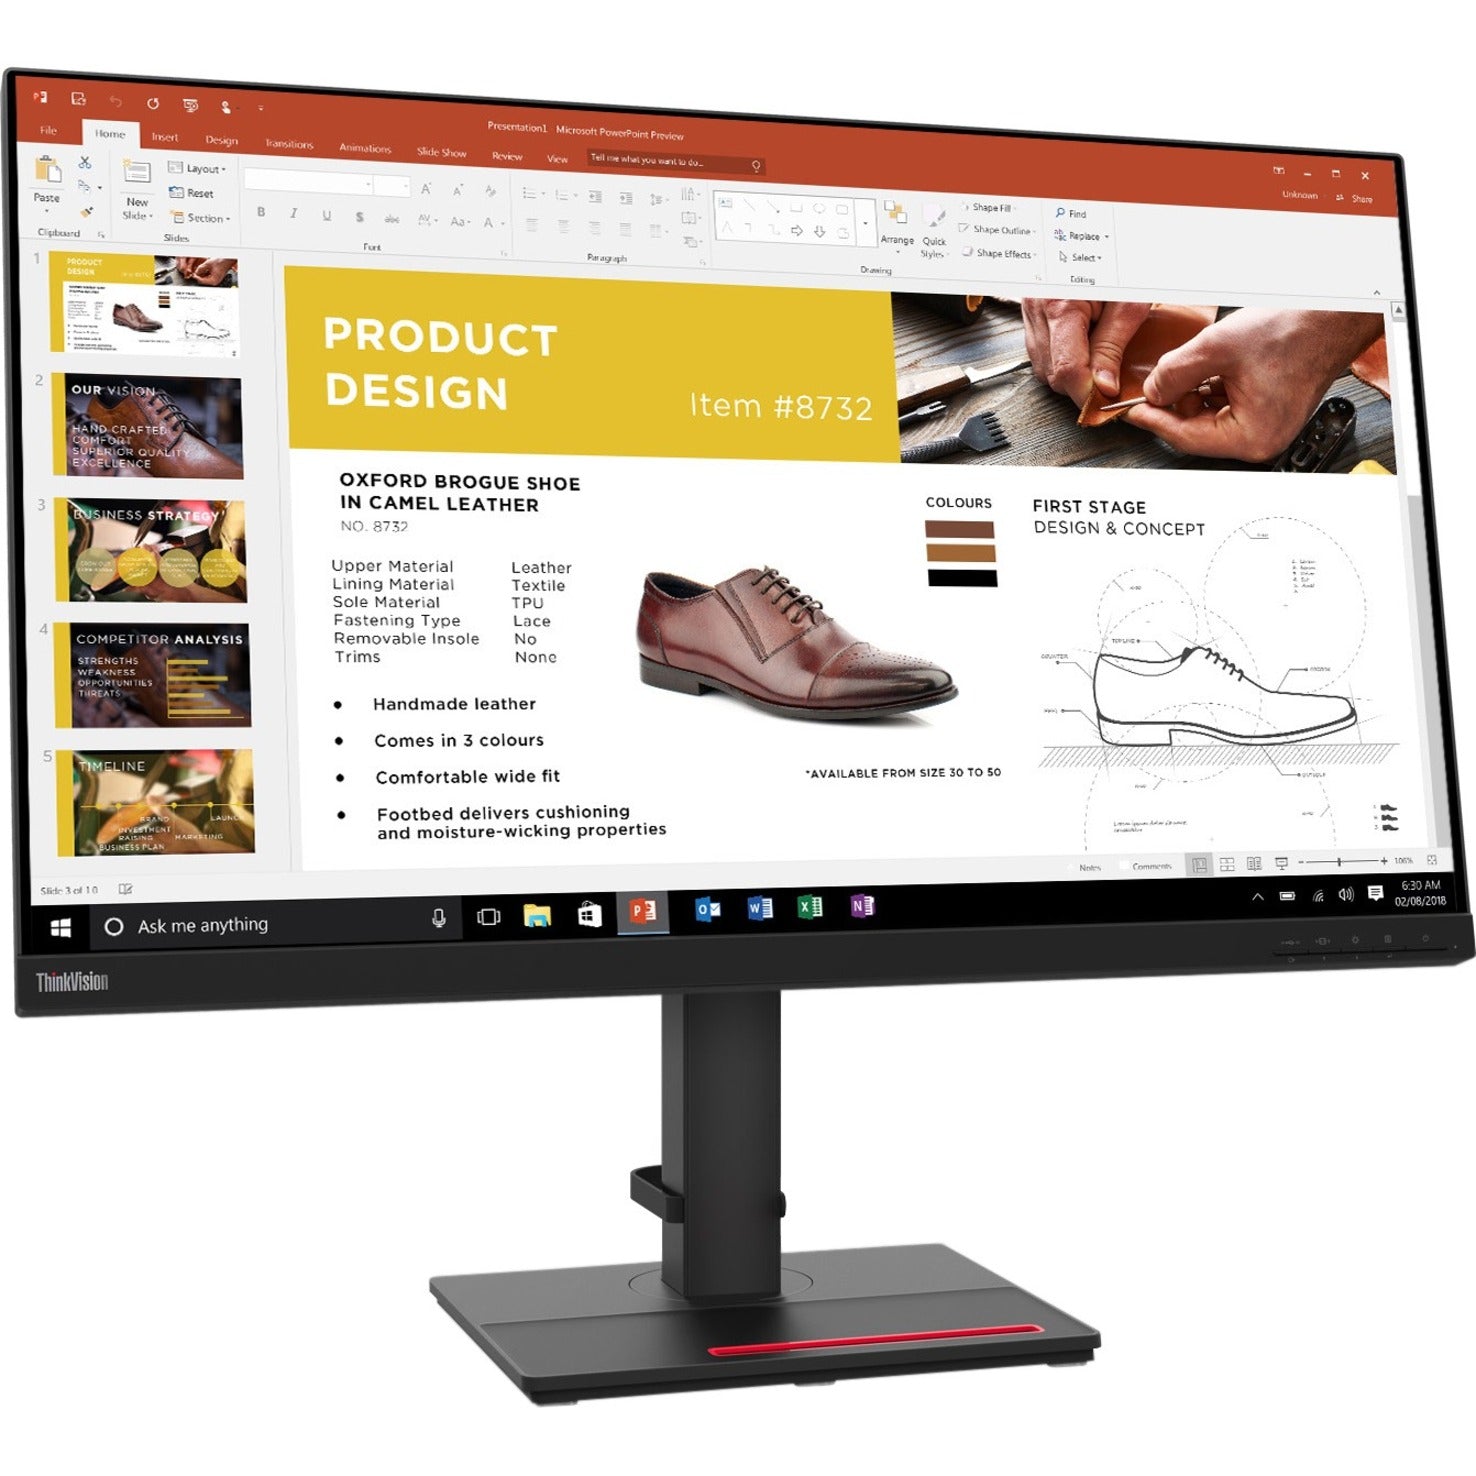 Lenovo ThinkVision P32p-20 31.5-inch UHD Monitor with USB Type-C [Discontinued]